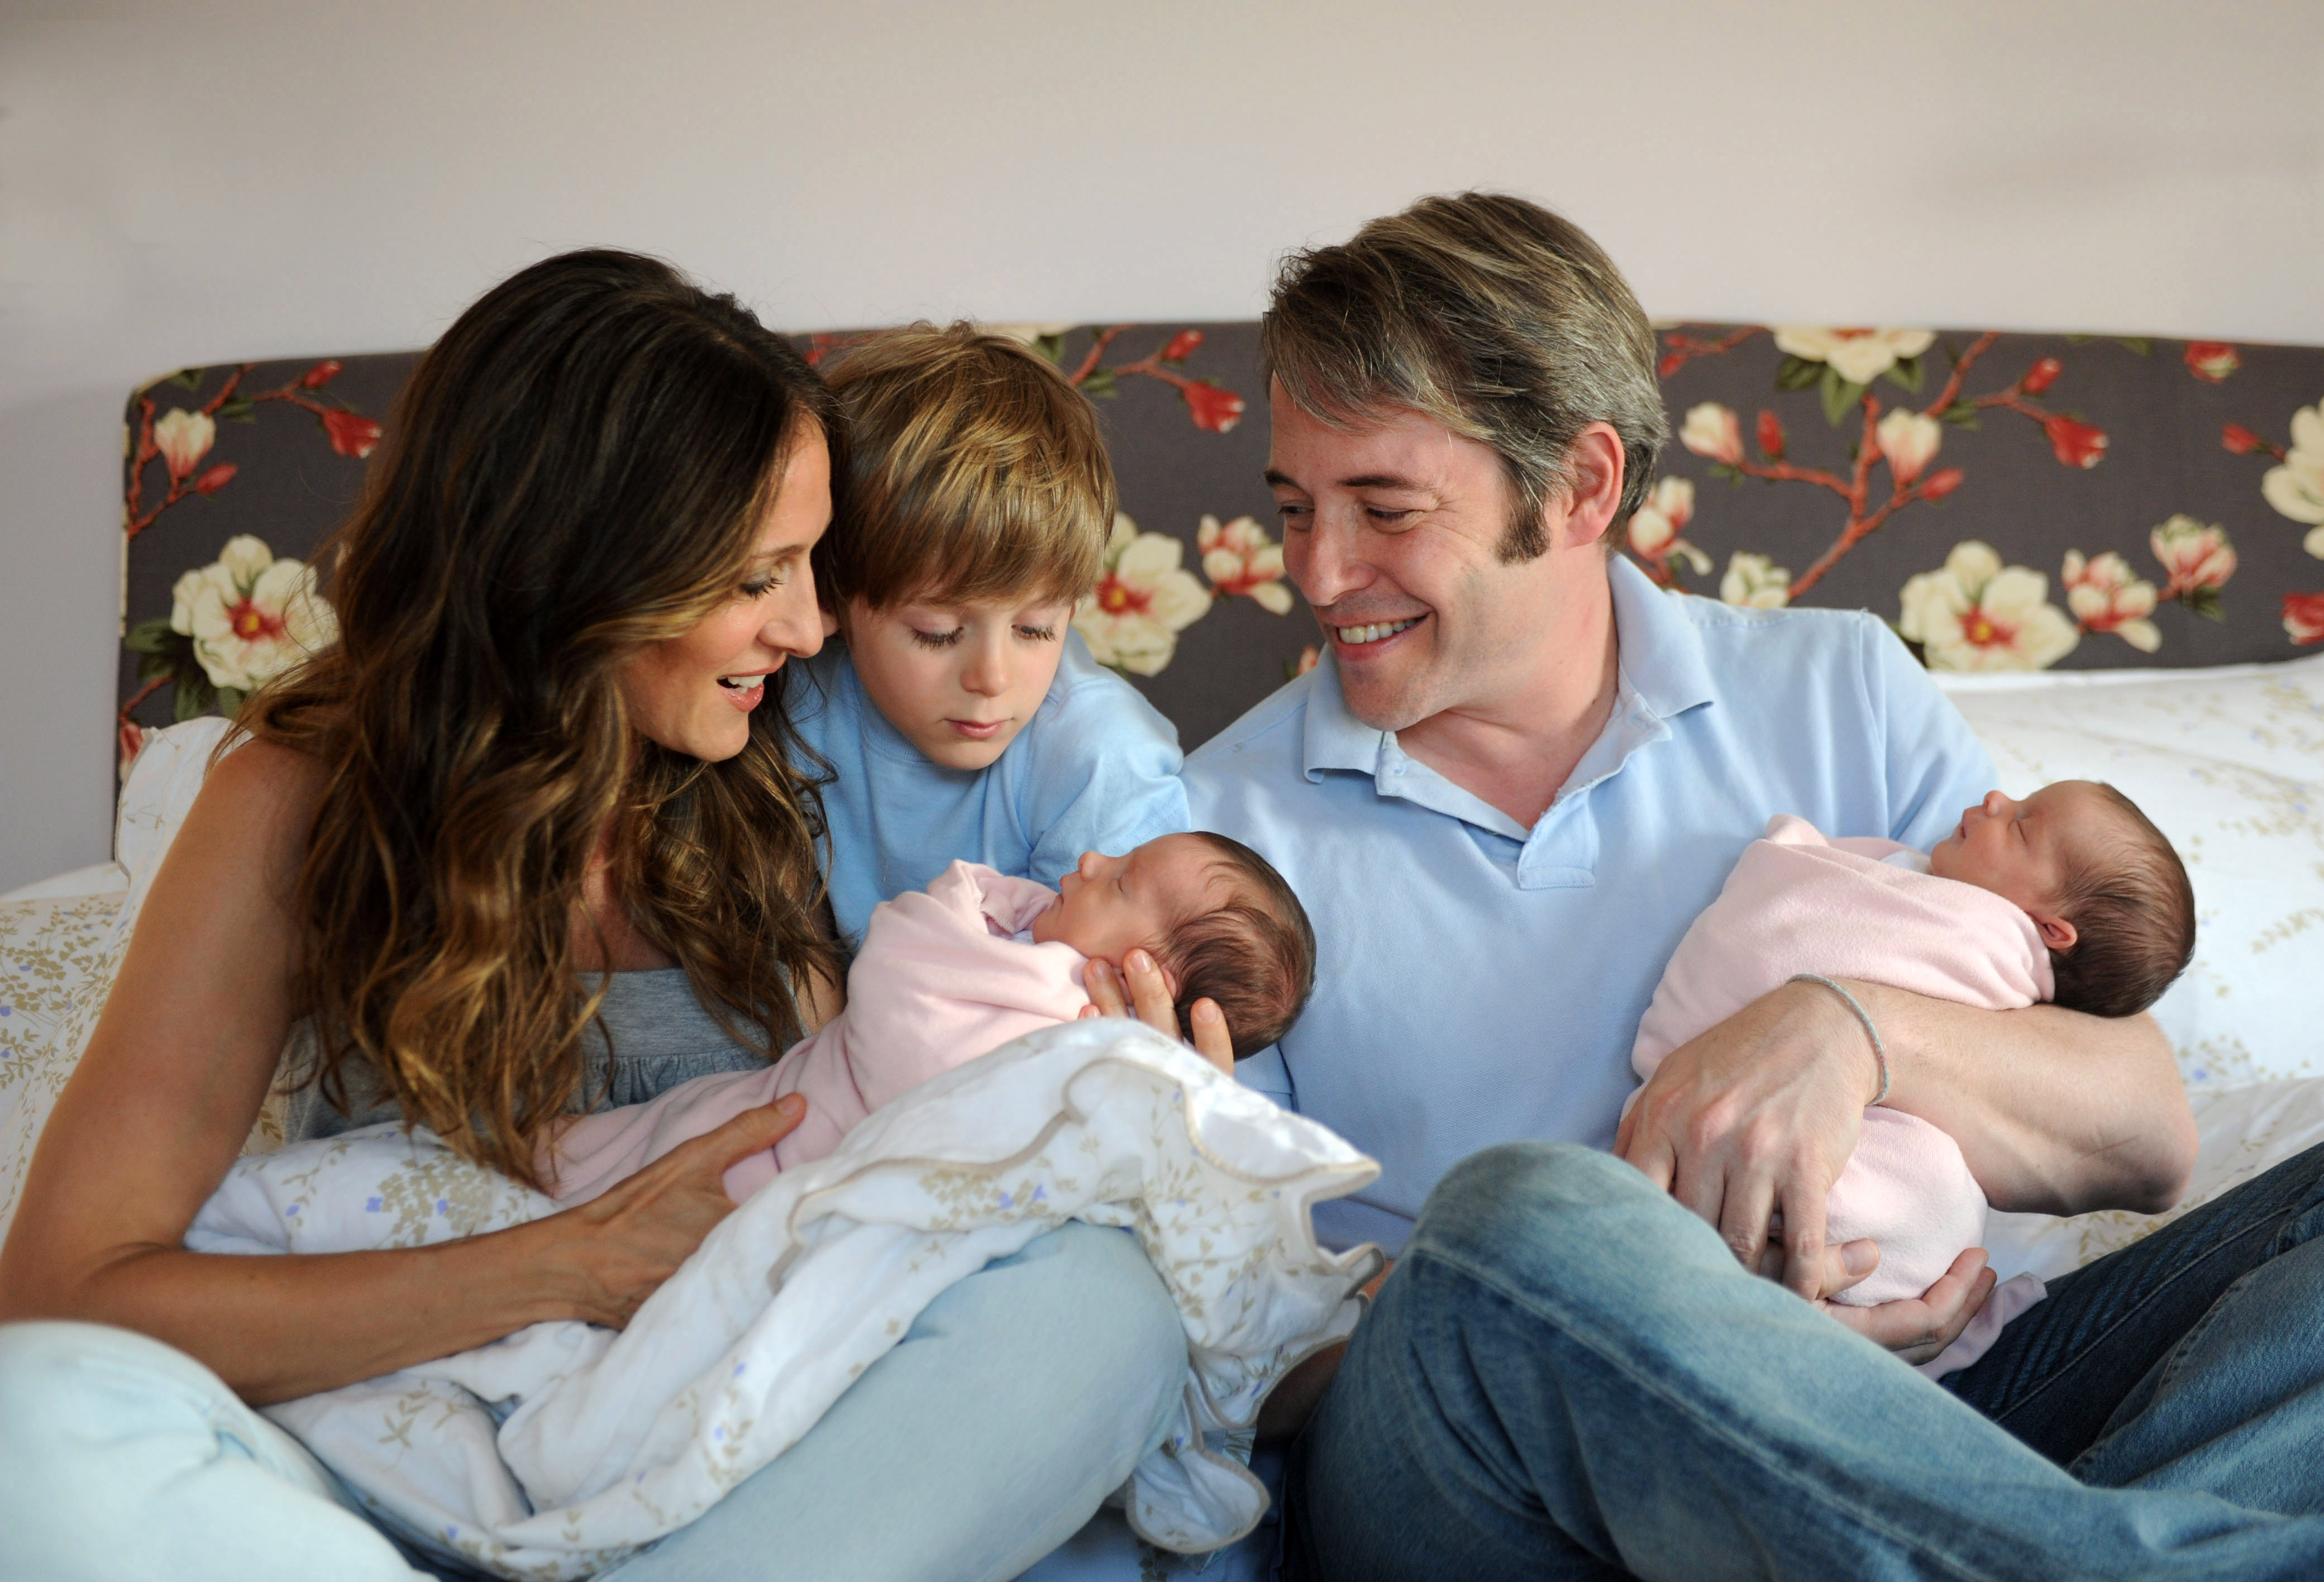 <p><span><a href="https://www.wonderwall.com/celebrity/profiles/overview/sarah-jessica-parker-395.article">Sarah Jessica Parker</a> held newborn daughter Marion Loretta Elwell Broderick and Matthew Broderick held her twin, Tabitha Hodge Broderick, while the couple's then-6-year-old son, James Wilkie Broderick, looked on in this family portrait snapped in New York City on June 22, 2009. Keep reading to see the Broderick kids at 20 and 13...</span></p>